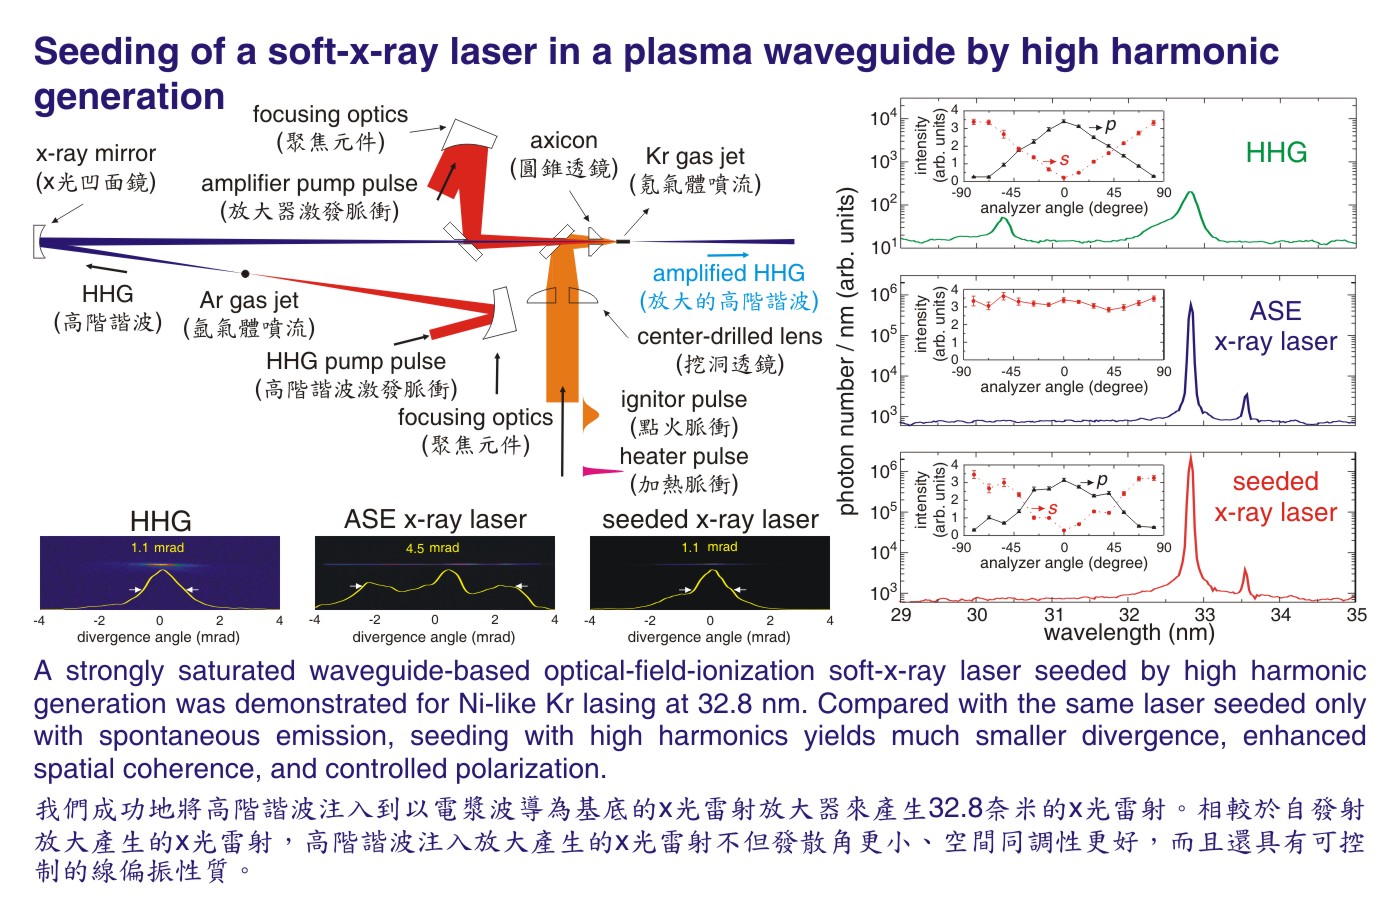 Seeding of a soft-x-ray laser in a plasma waveguide by high harmonic generation